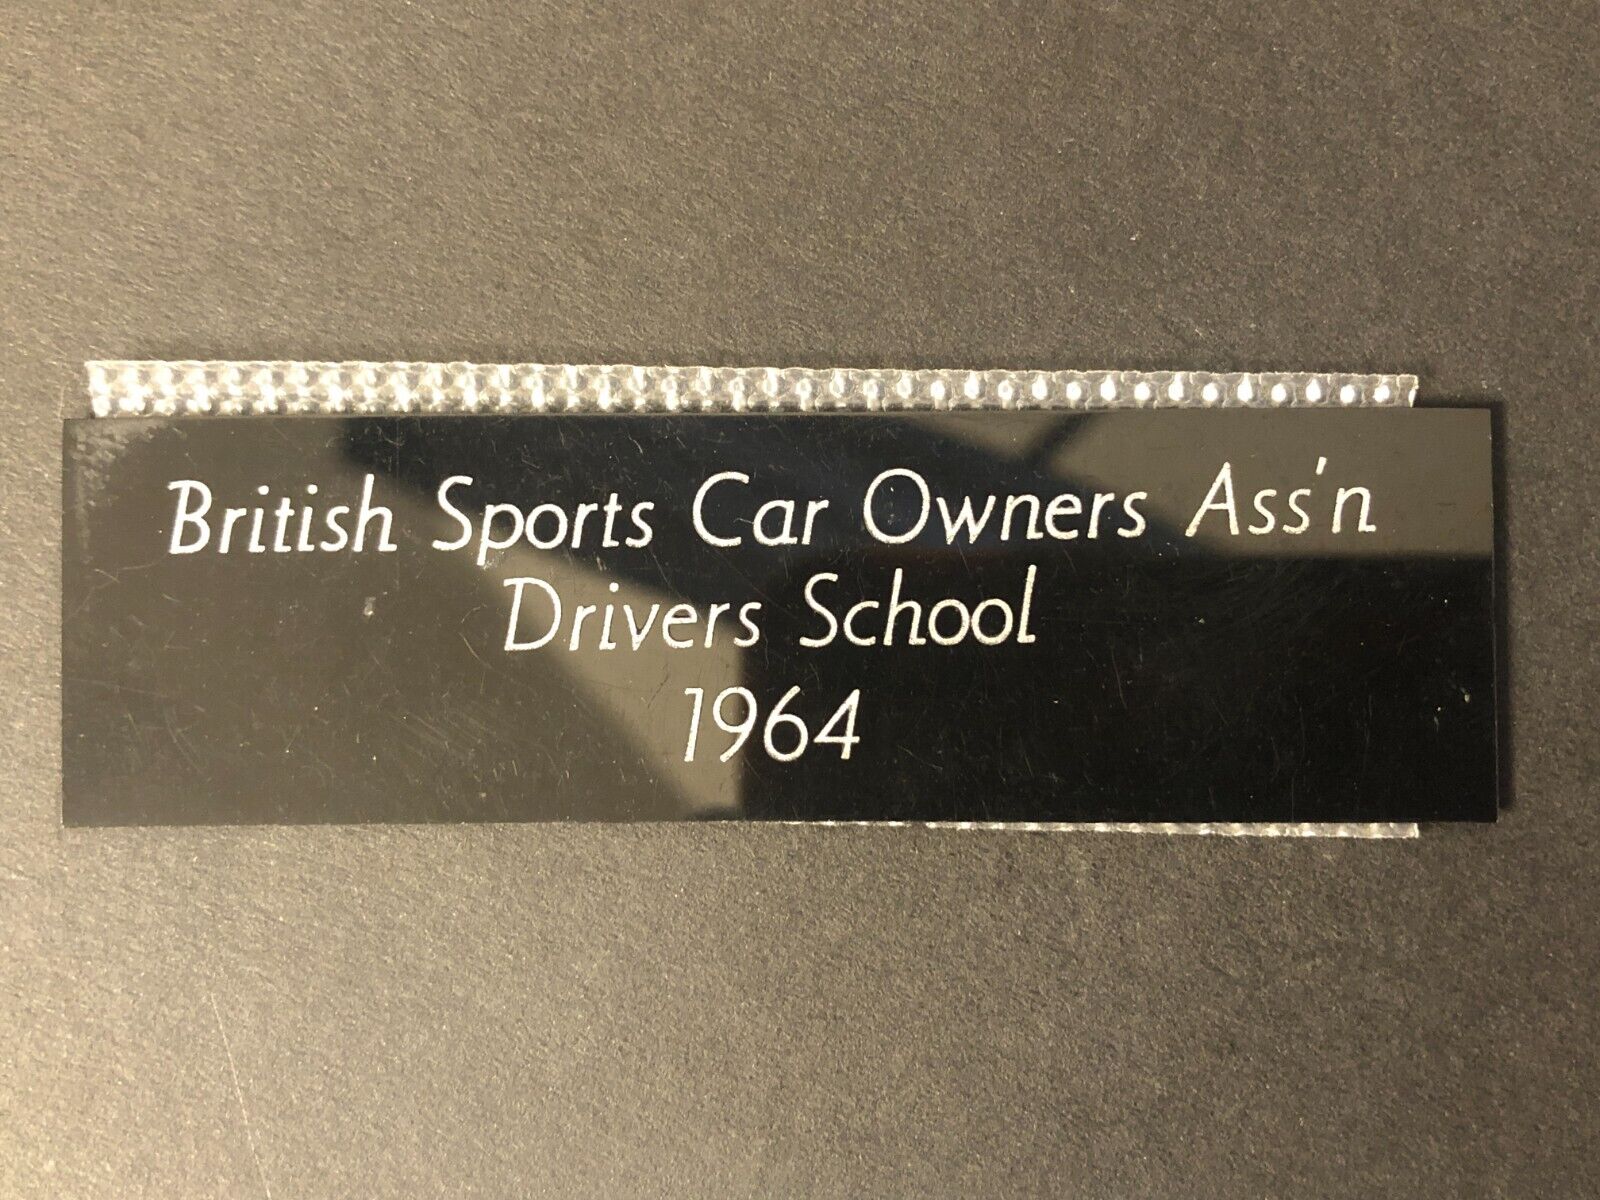 BSCOA British Sports Car Owners 1964 Drivers School Auto Racing Wall Plaque